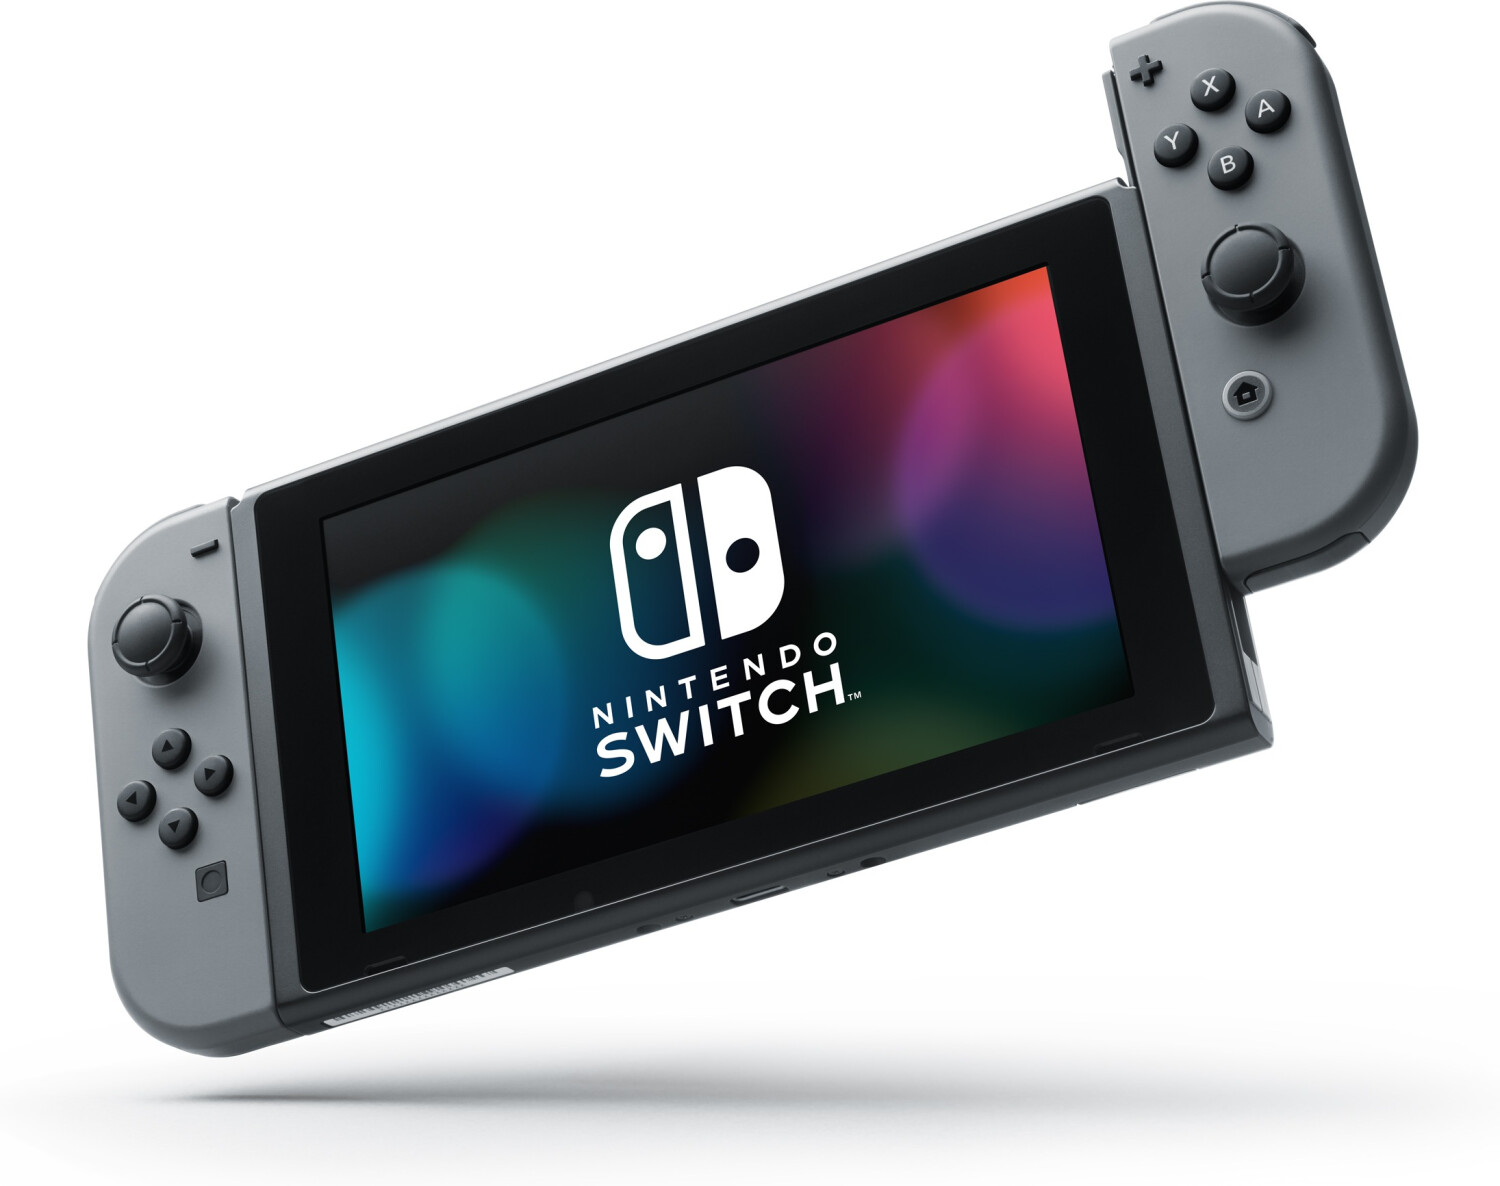 Nintendo Switch has sold 84.59m units as of March 31, 2021 